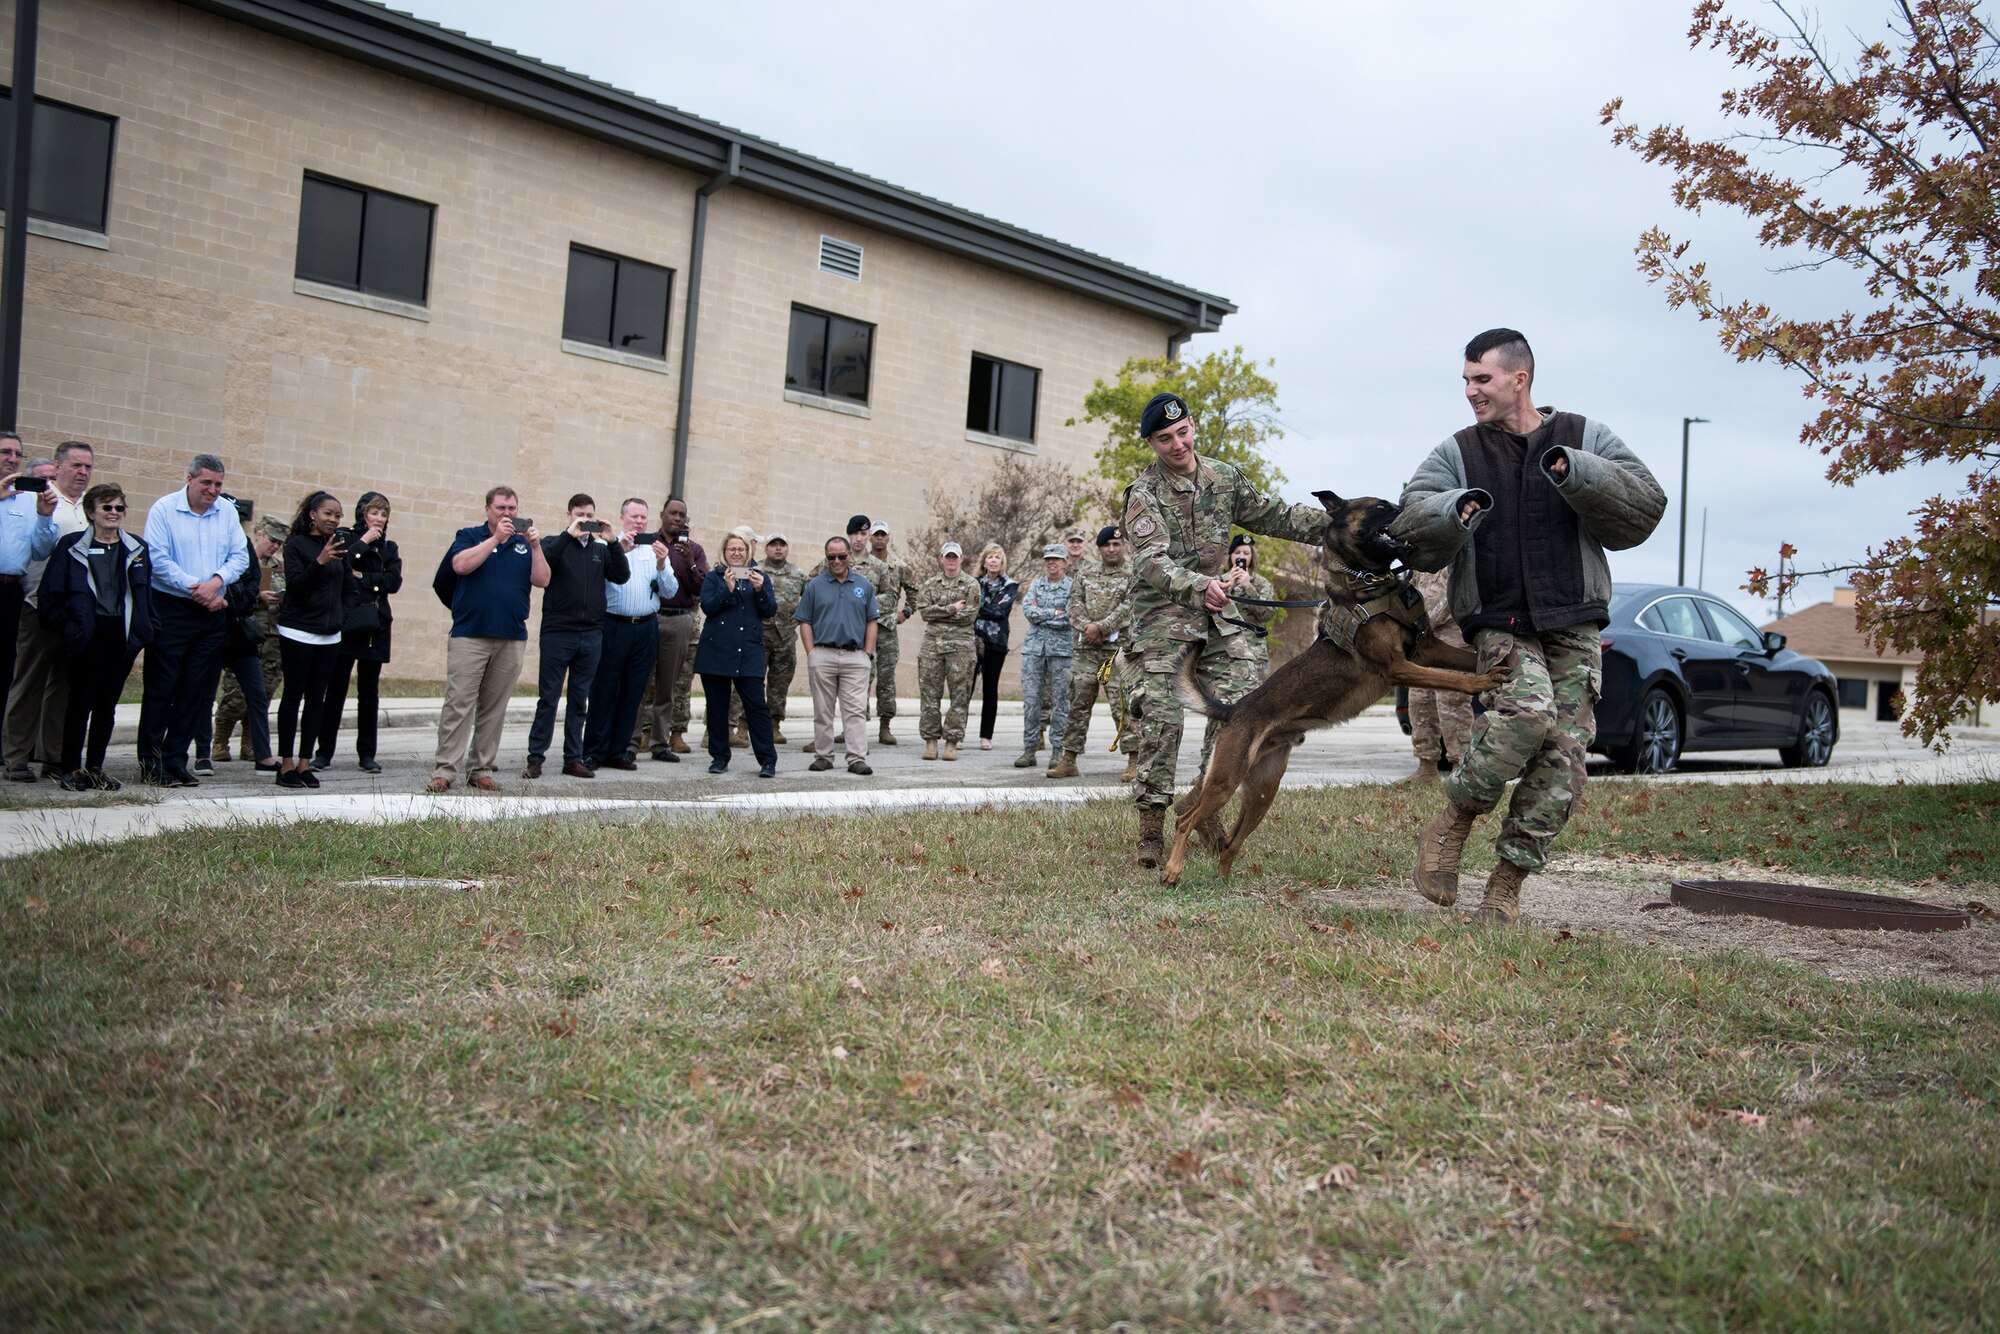 Civic leaders watch a K9 demonstration Nov. 7, 2019, at Joint Base San Antonio-Medina Annex, Texas. During the visit, civic leaders toured missions of 37th Training Wing, 12th Flying Training Wing, 502nd Air Base Wing and Air Force Recruiting Service, all at JBSA locations. The Air Force Civic Leader Program is an Air Staff-level program comprising major command-selected community leaders from a wide variety of industries and sectors, including banking and economic development, construction, manufacturing, education, healthcare, science and technology. The program helps community leaders understand and advocate for the Air Force’s diverse missions.